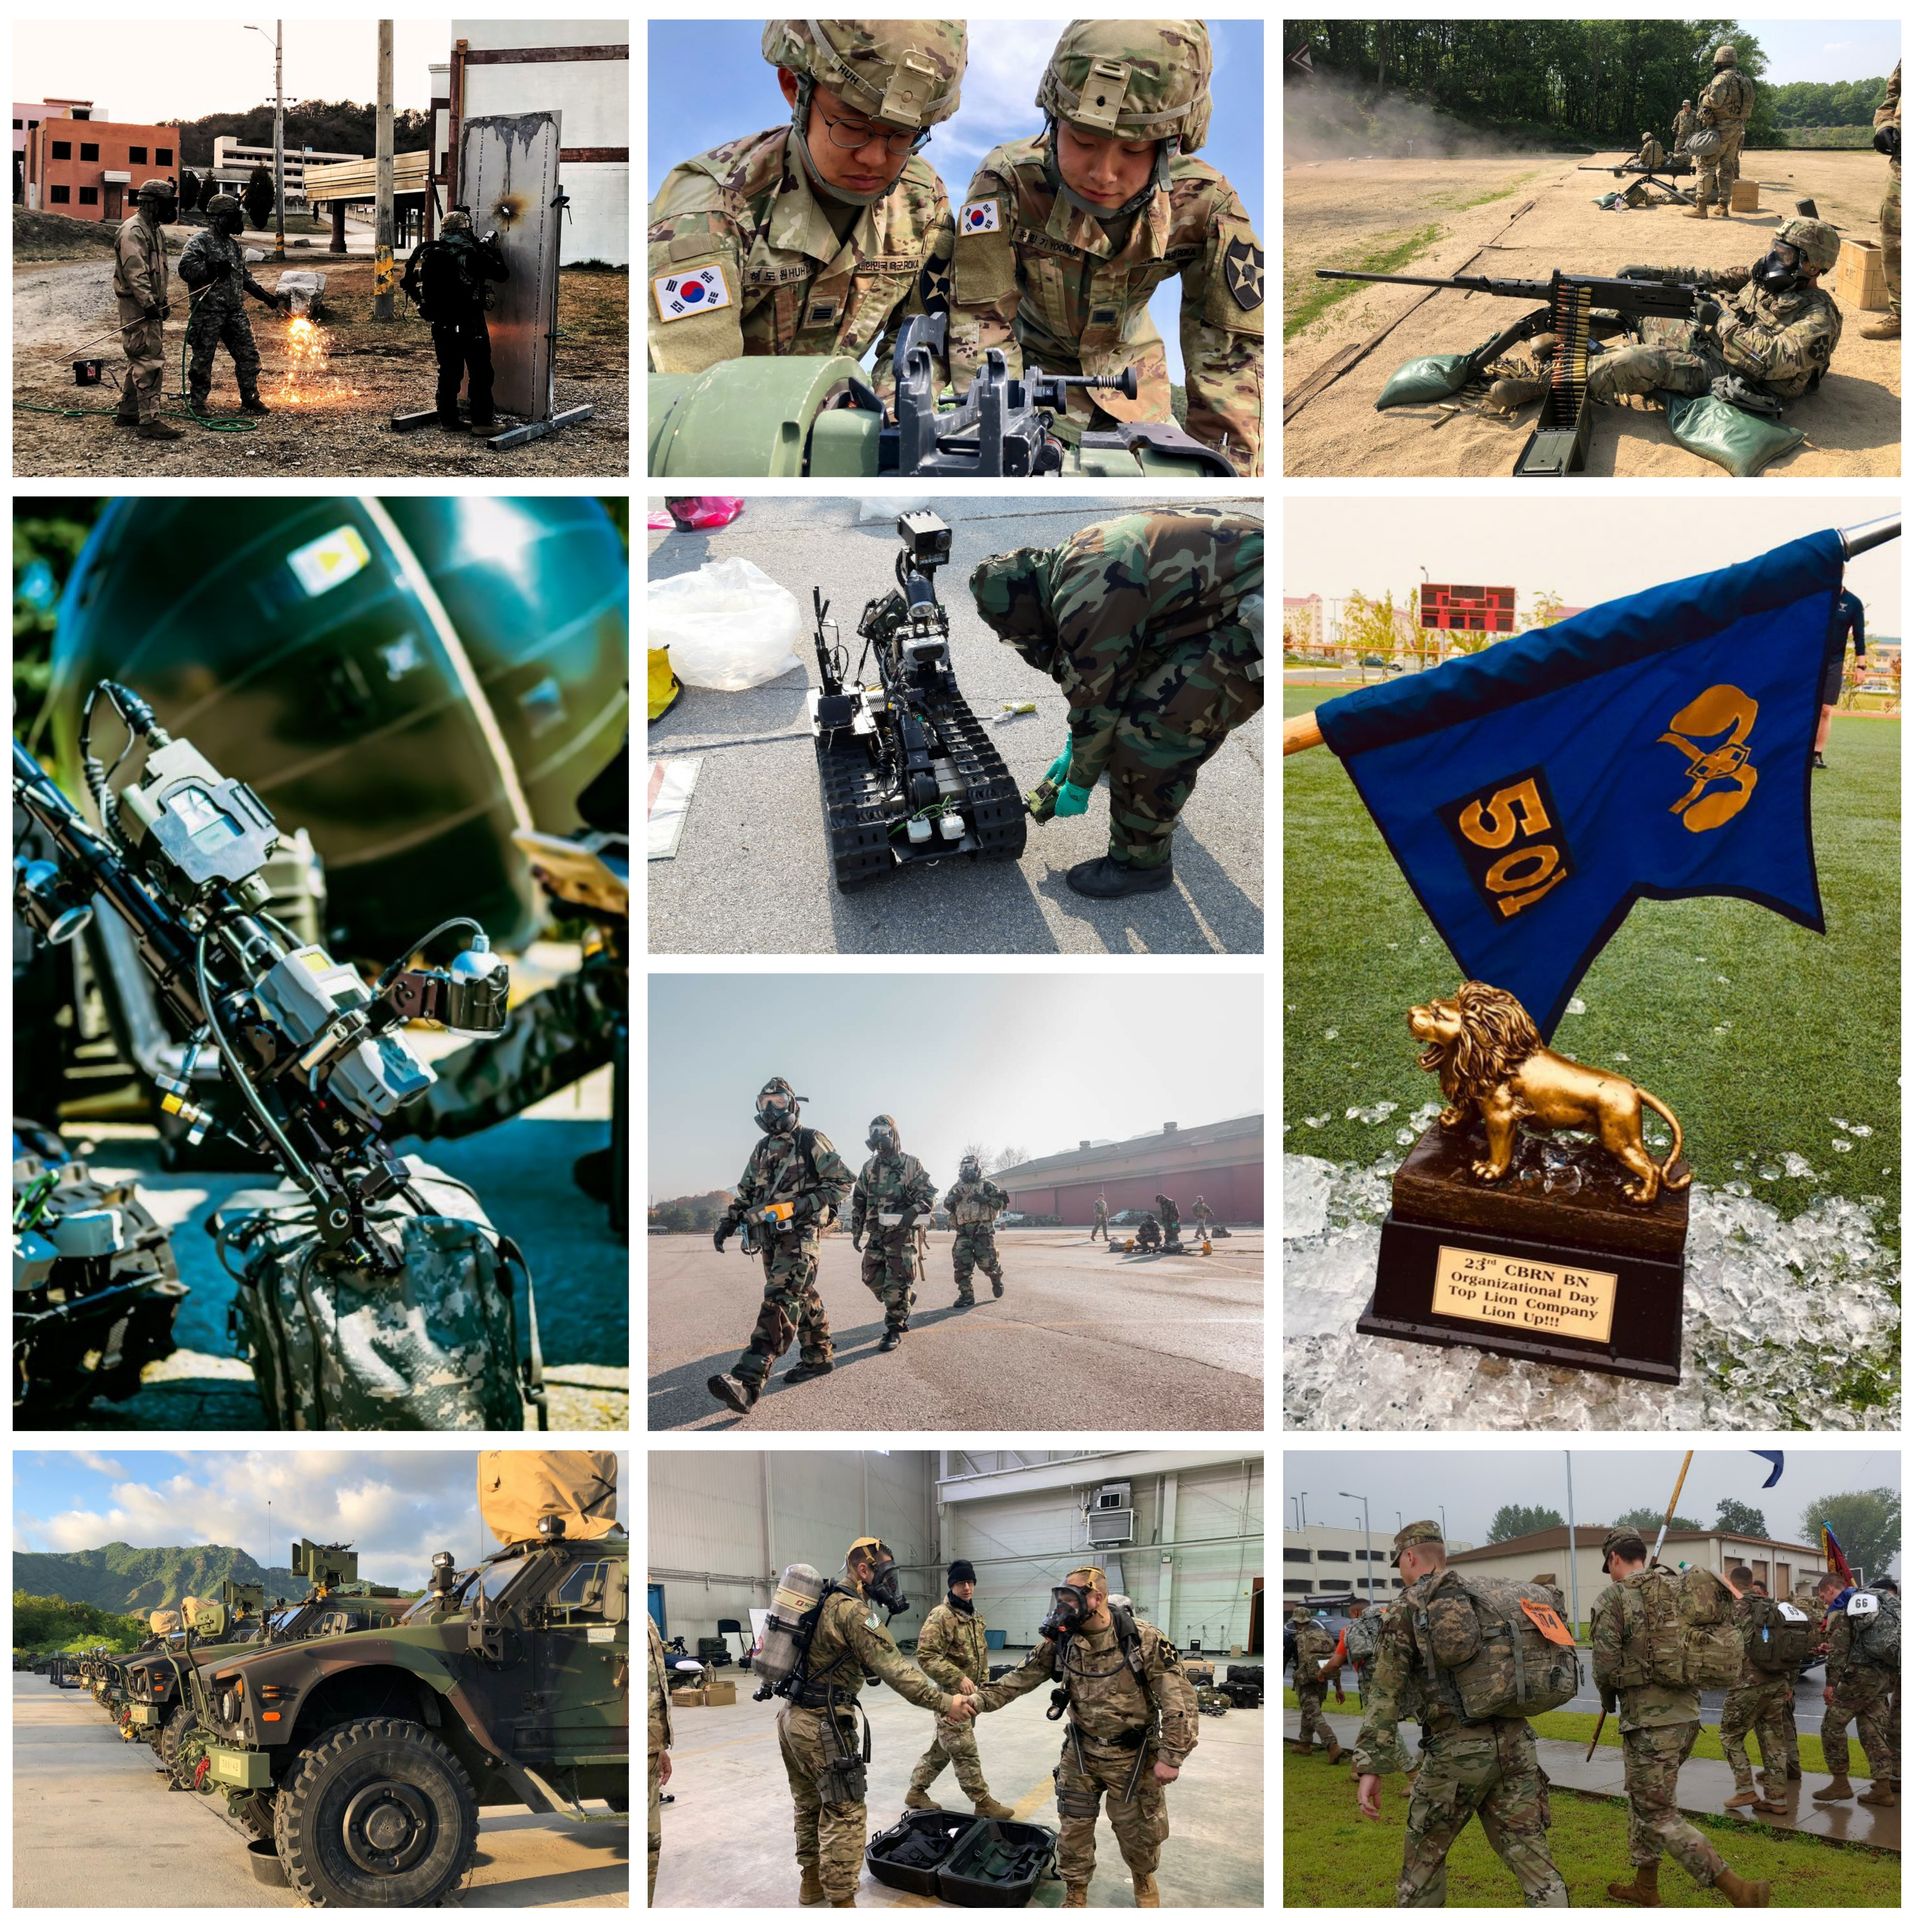 Collage of US Army Robotics Workers: An image montage showcasing various individuals working in the field of robotics within the US Army. The collage features photos of engineers, technicians, and researchers engaged in designing, developing, and operating robotic systems for military applications.